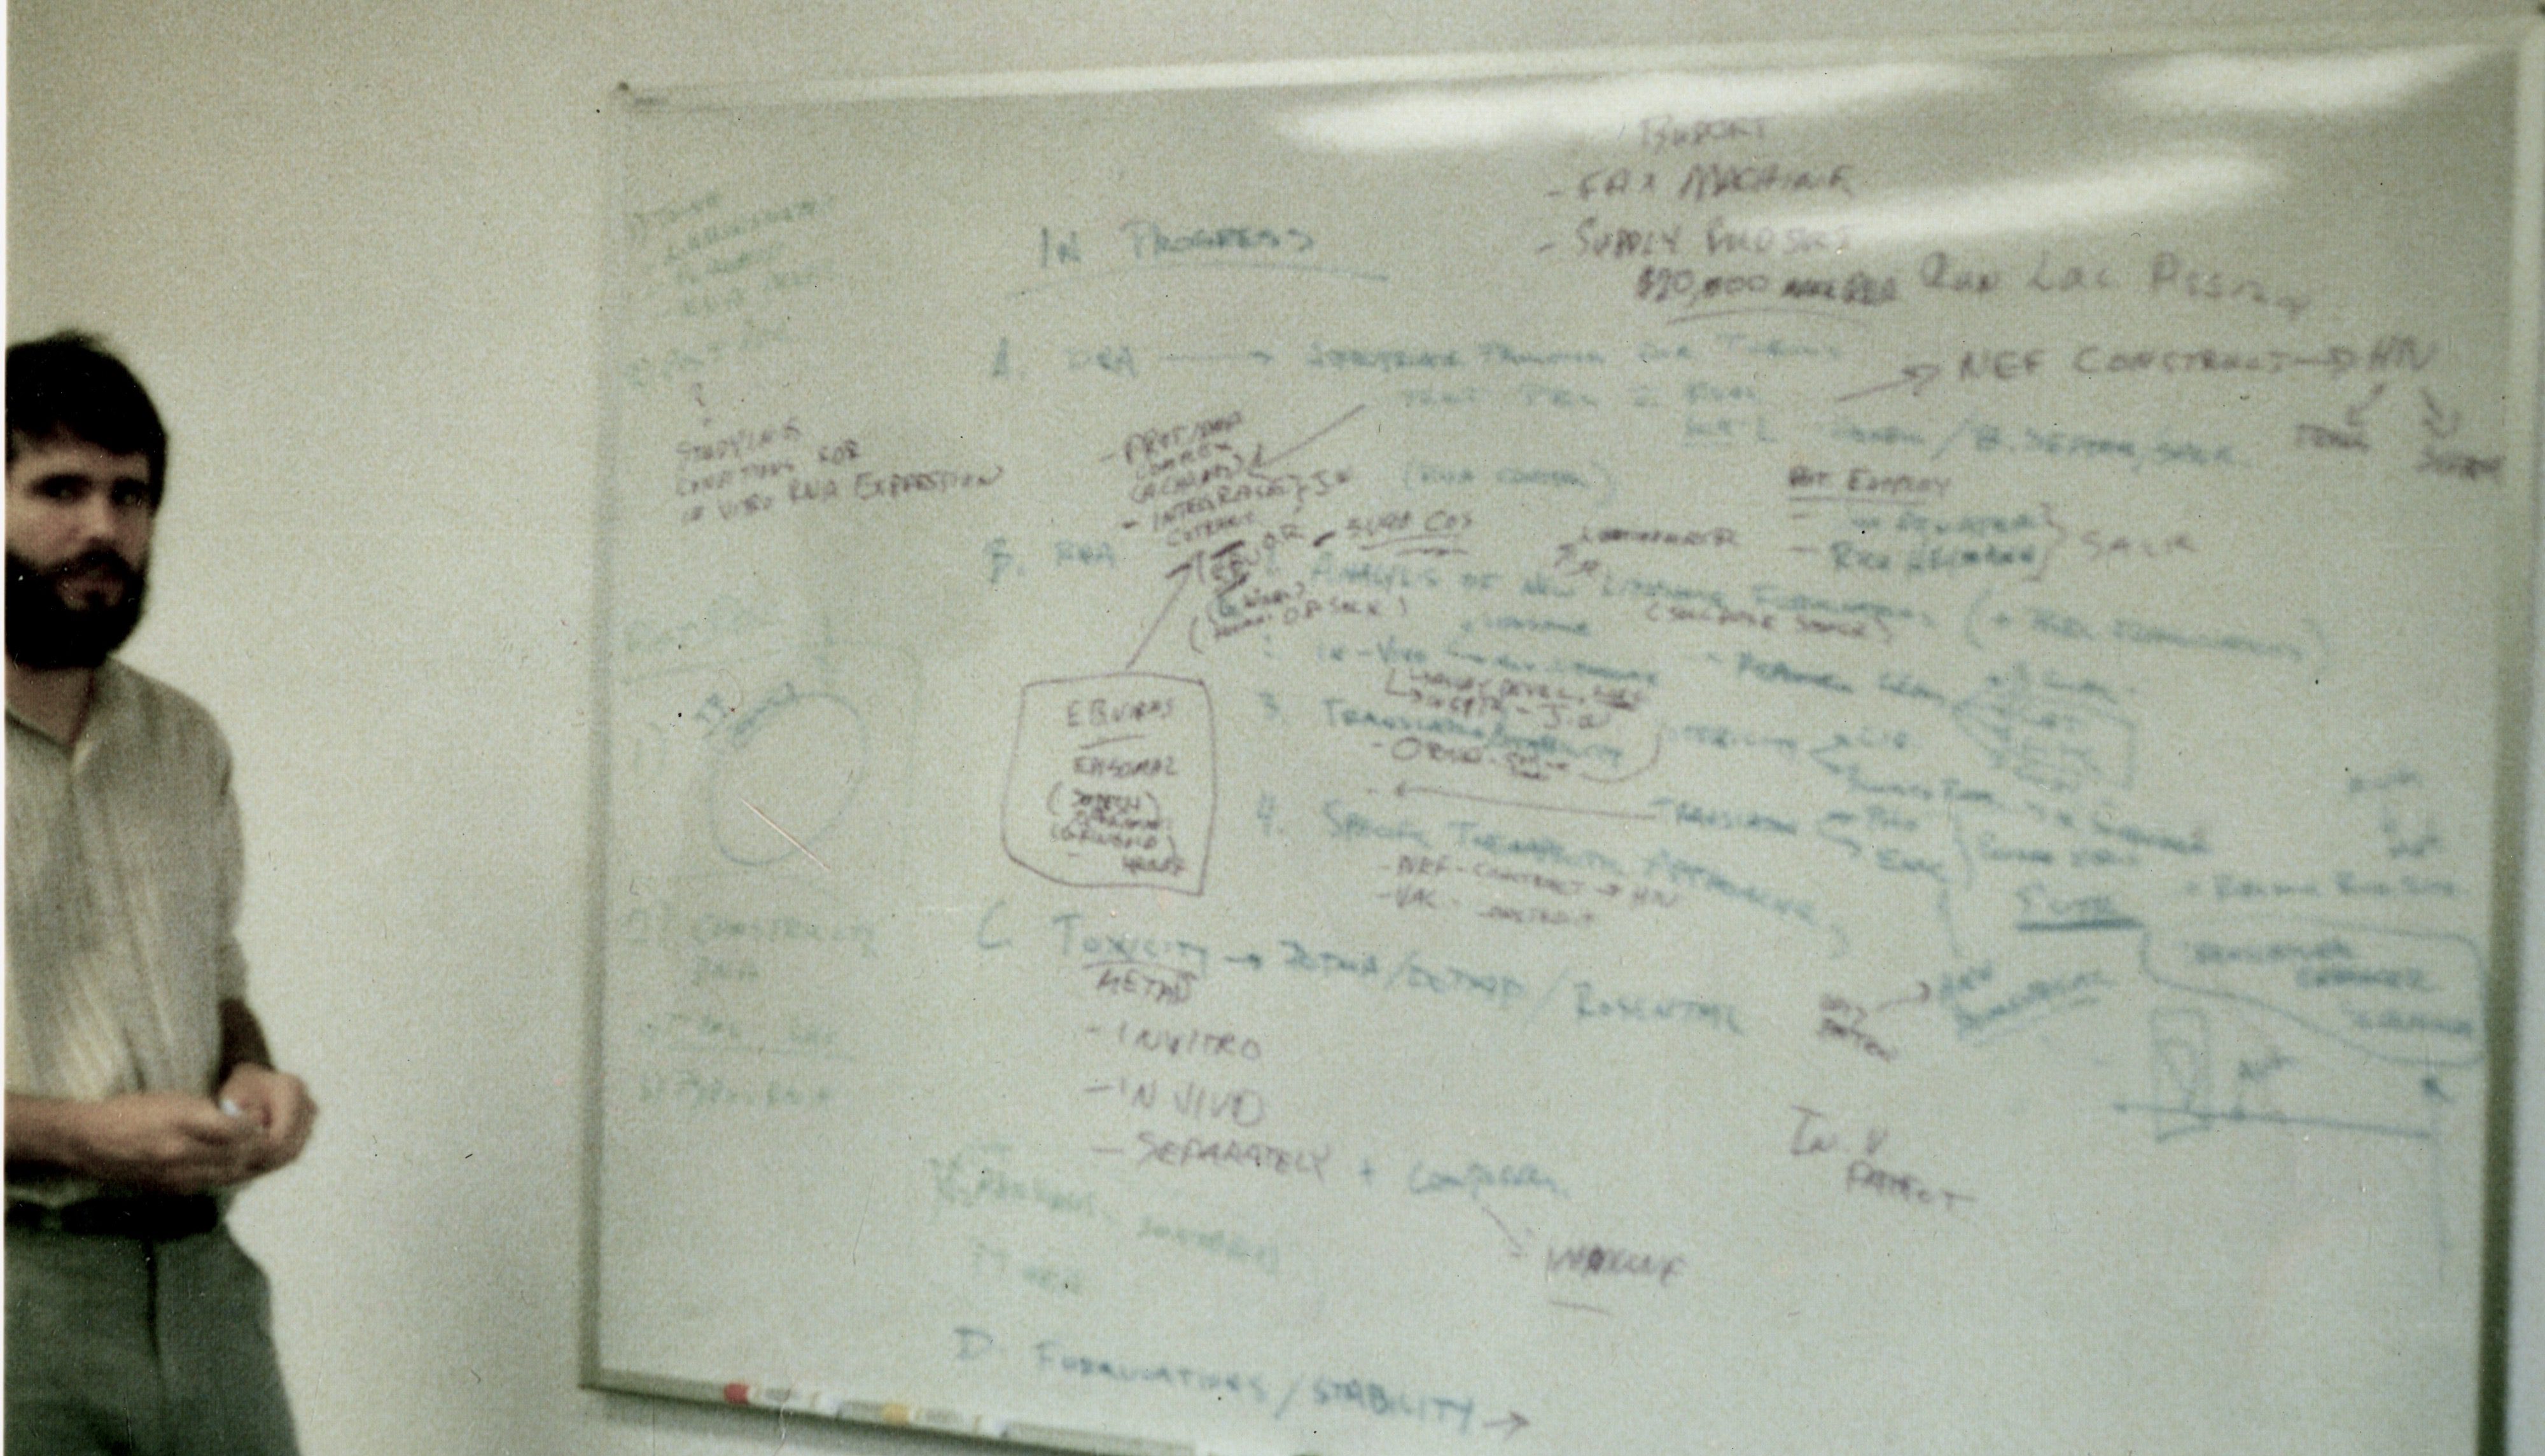 Robert Malone MD in 1989 - whiteboard of research to be conducted